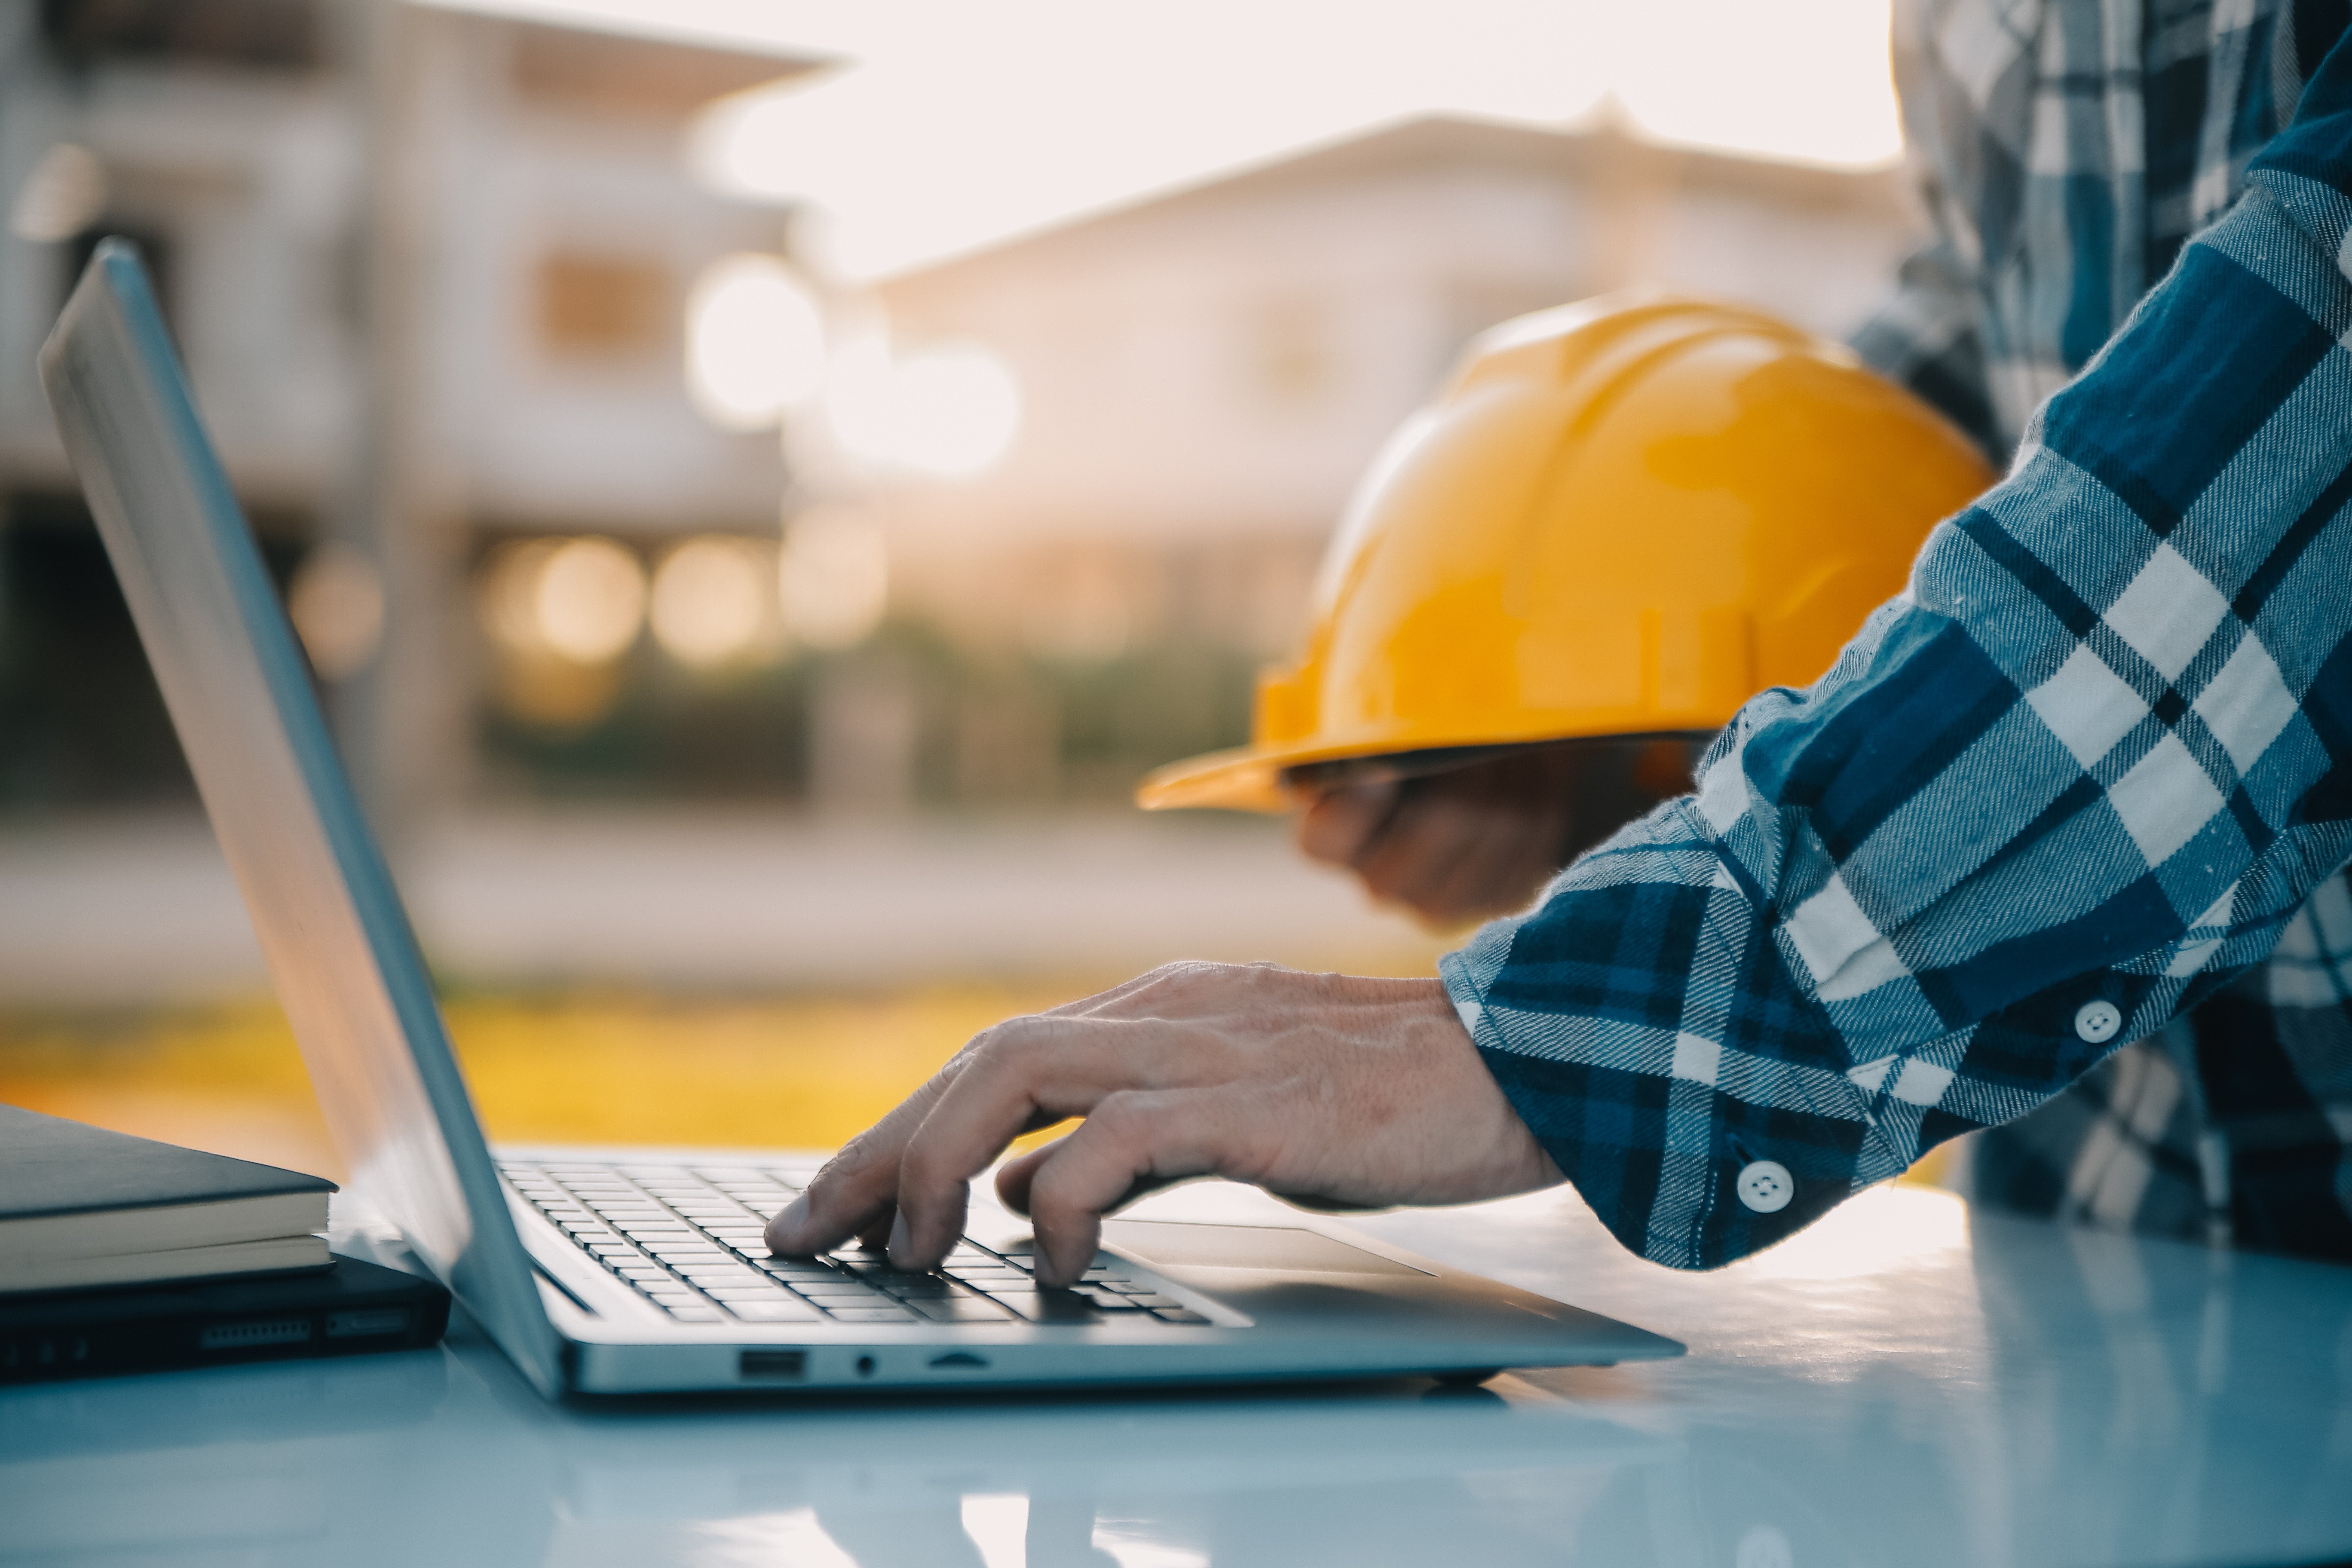 Person wearing a plaid shirt types on a laptop while holding a yellow hard hat. Blurry outdoor background.